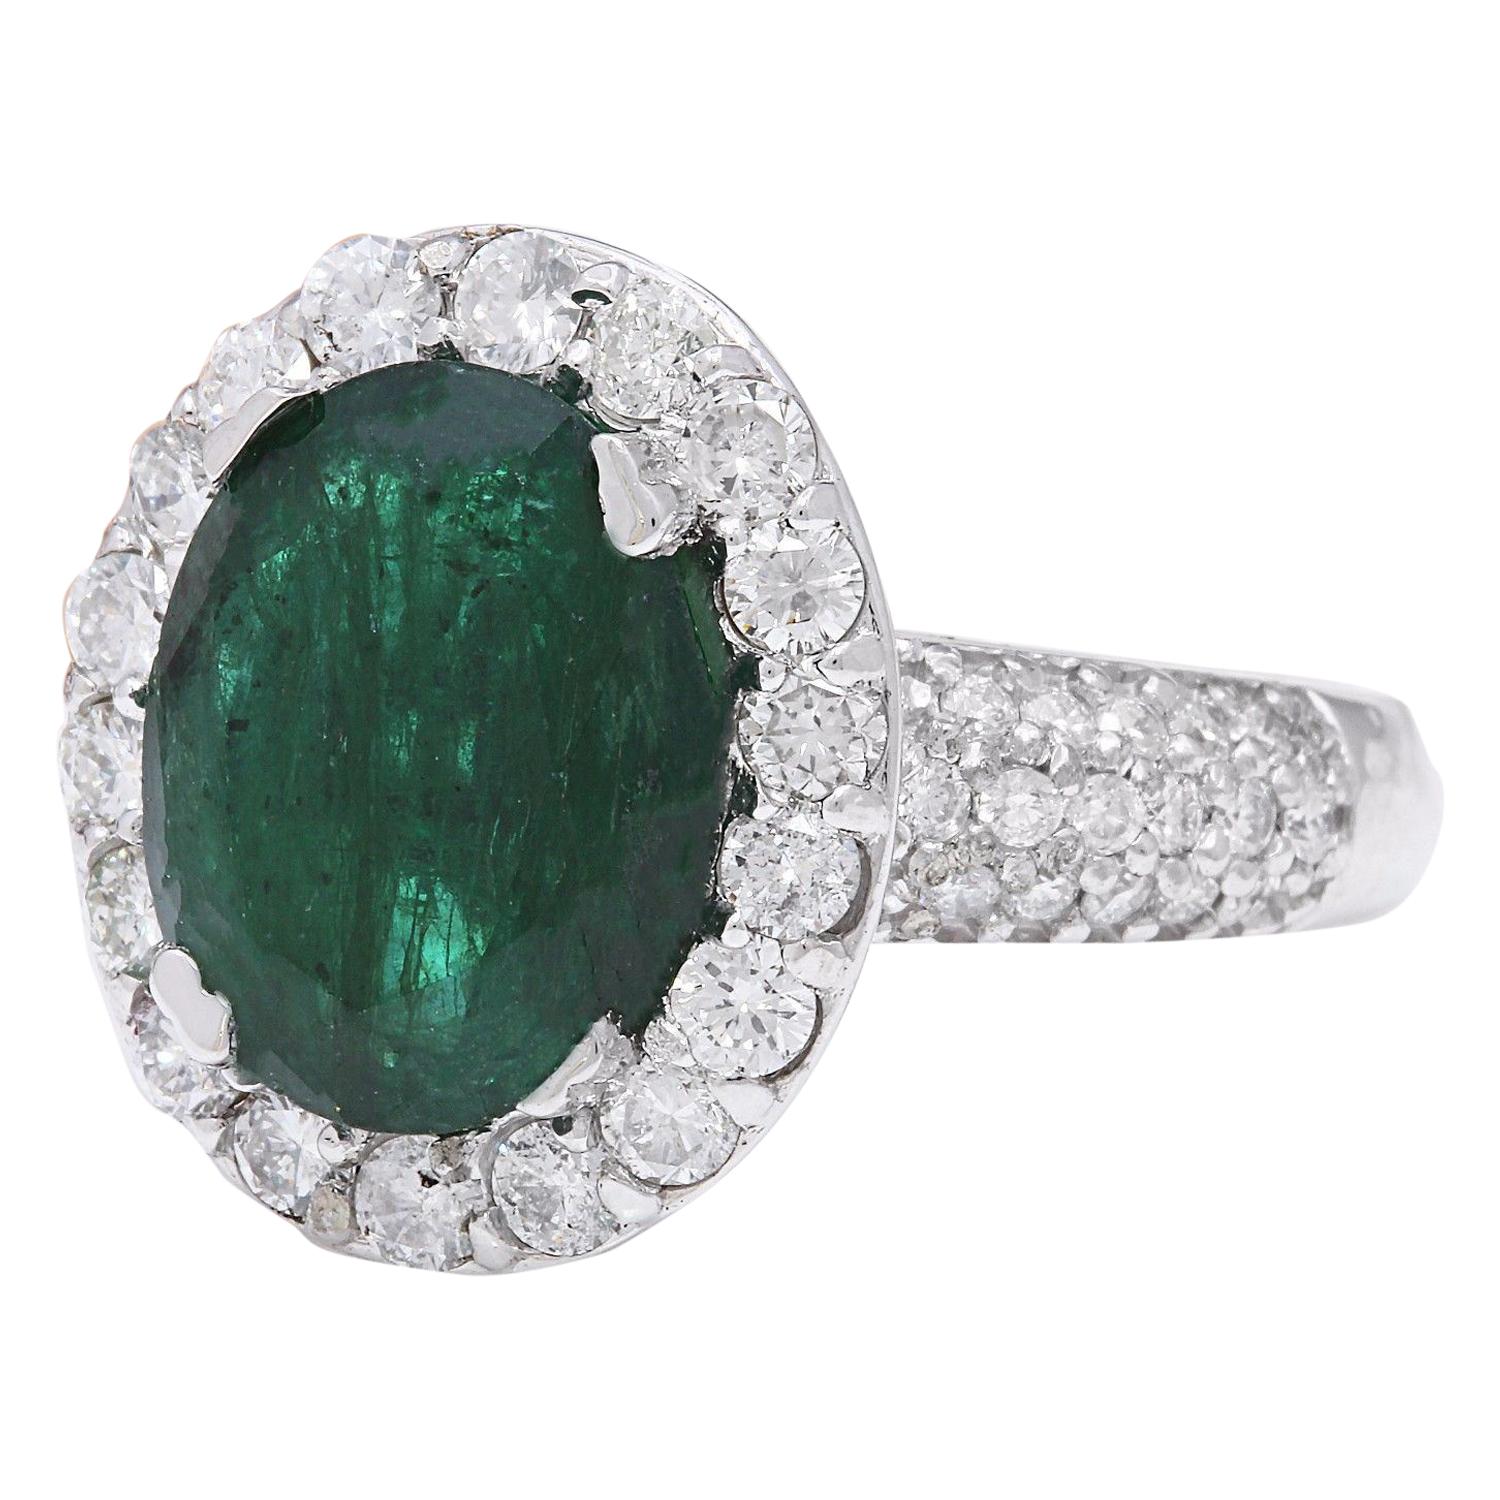 3.80 Carat Natural Emerald 14K Solid White Gold Diamond Ring
 Item Type: Ring
 Item Style: Engagement
 Material: 14K White Gold
 Mainstone: Emerald
 Stone Color: Green
 Stone Weight: 2.80 Carat
 Stone Shape: Oval
 Stone Quantity: 1
 Stone